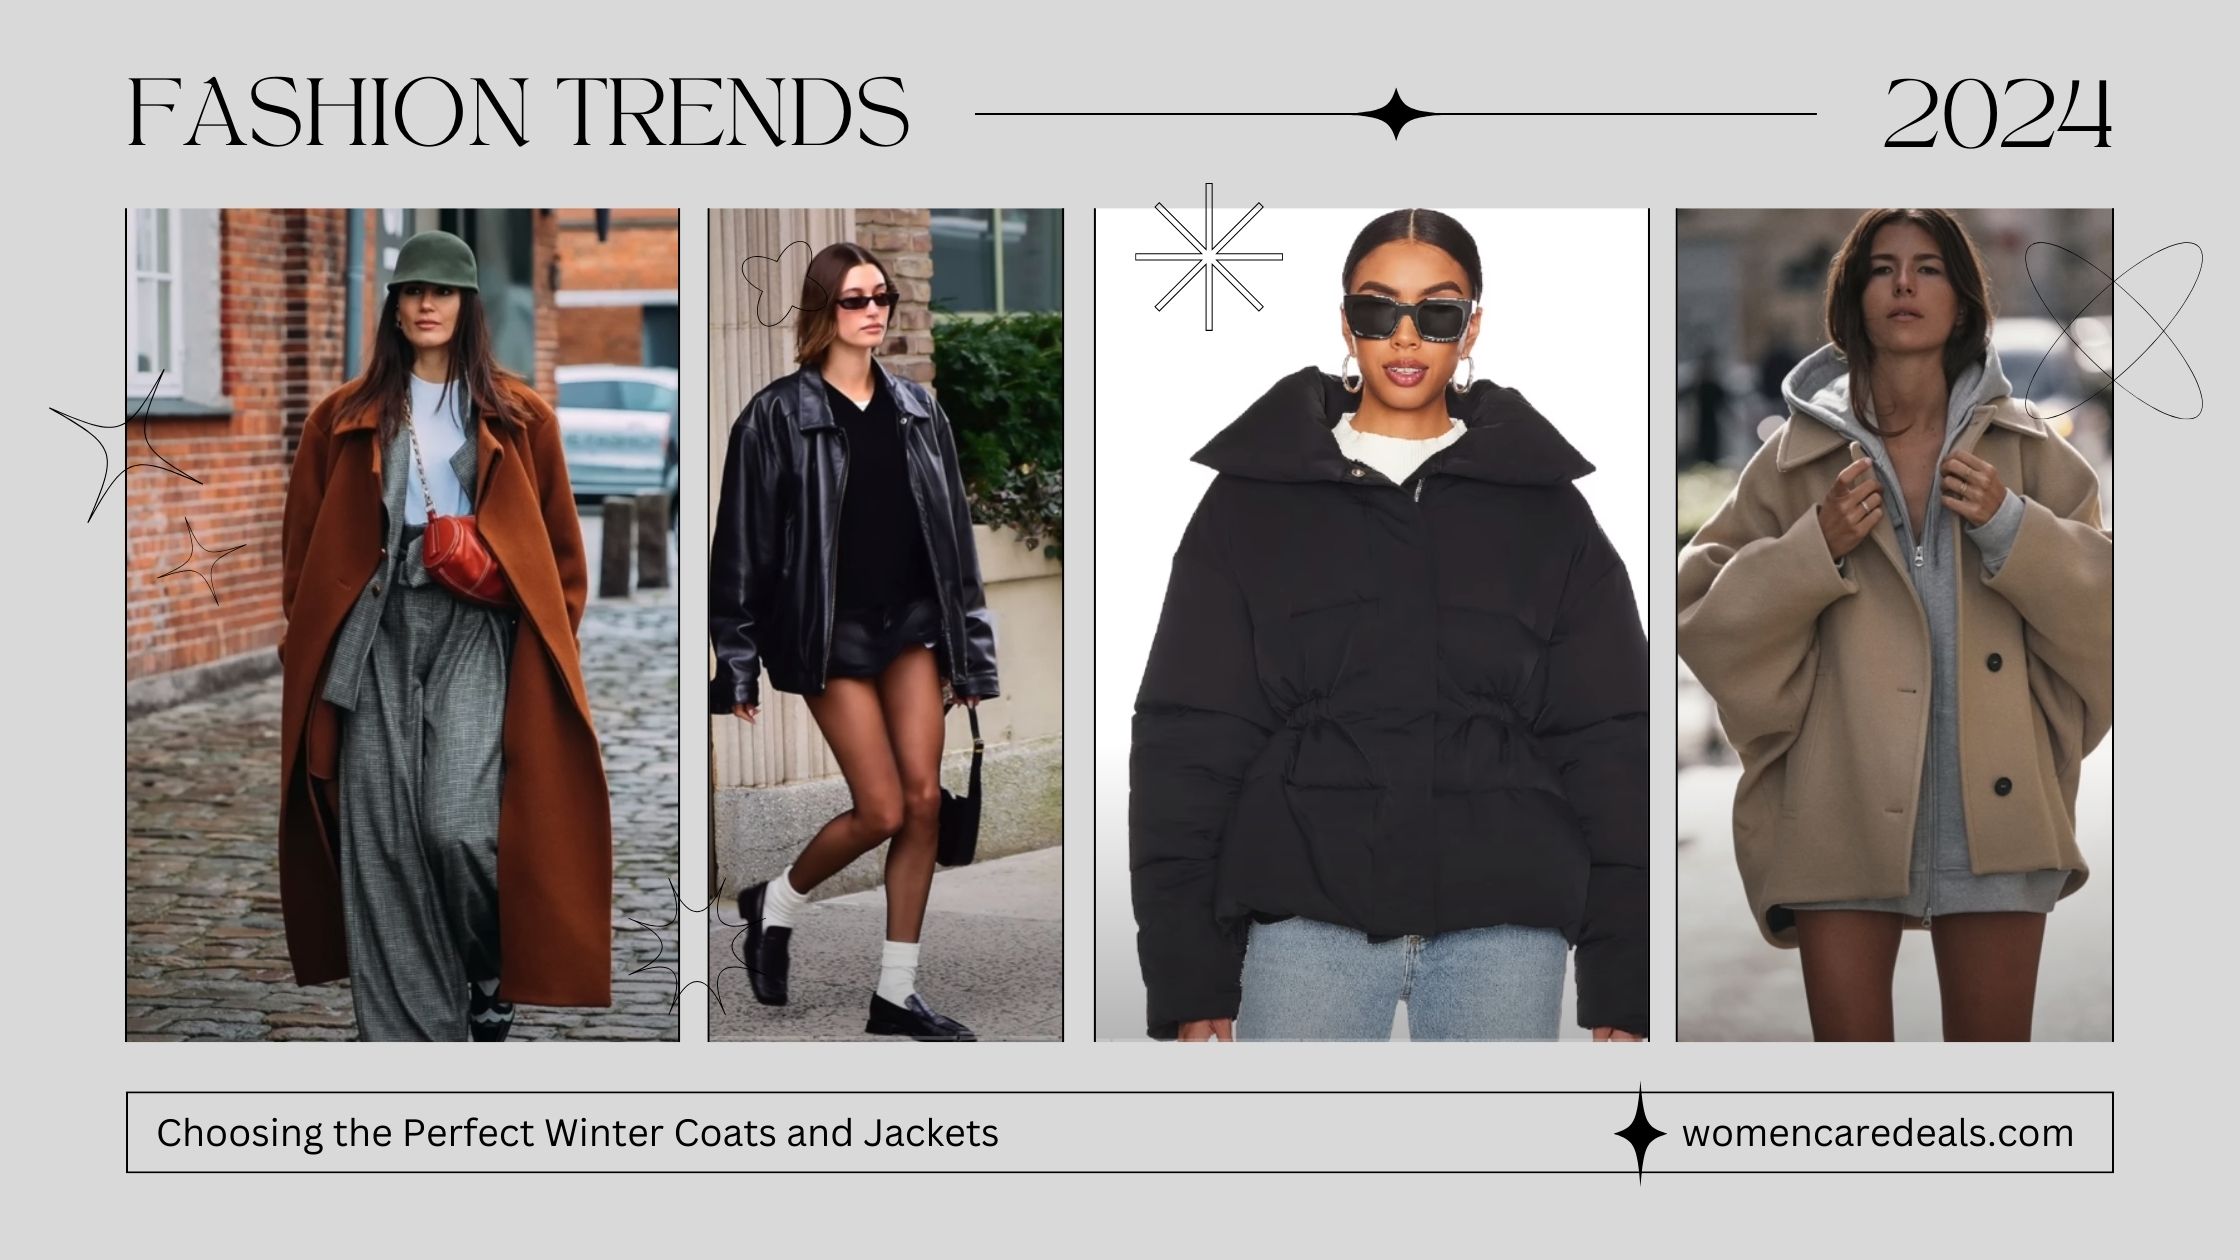 Choosing the Perfect Winter Coats and Jackets